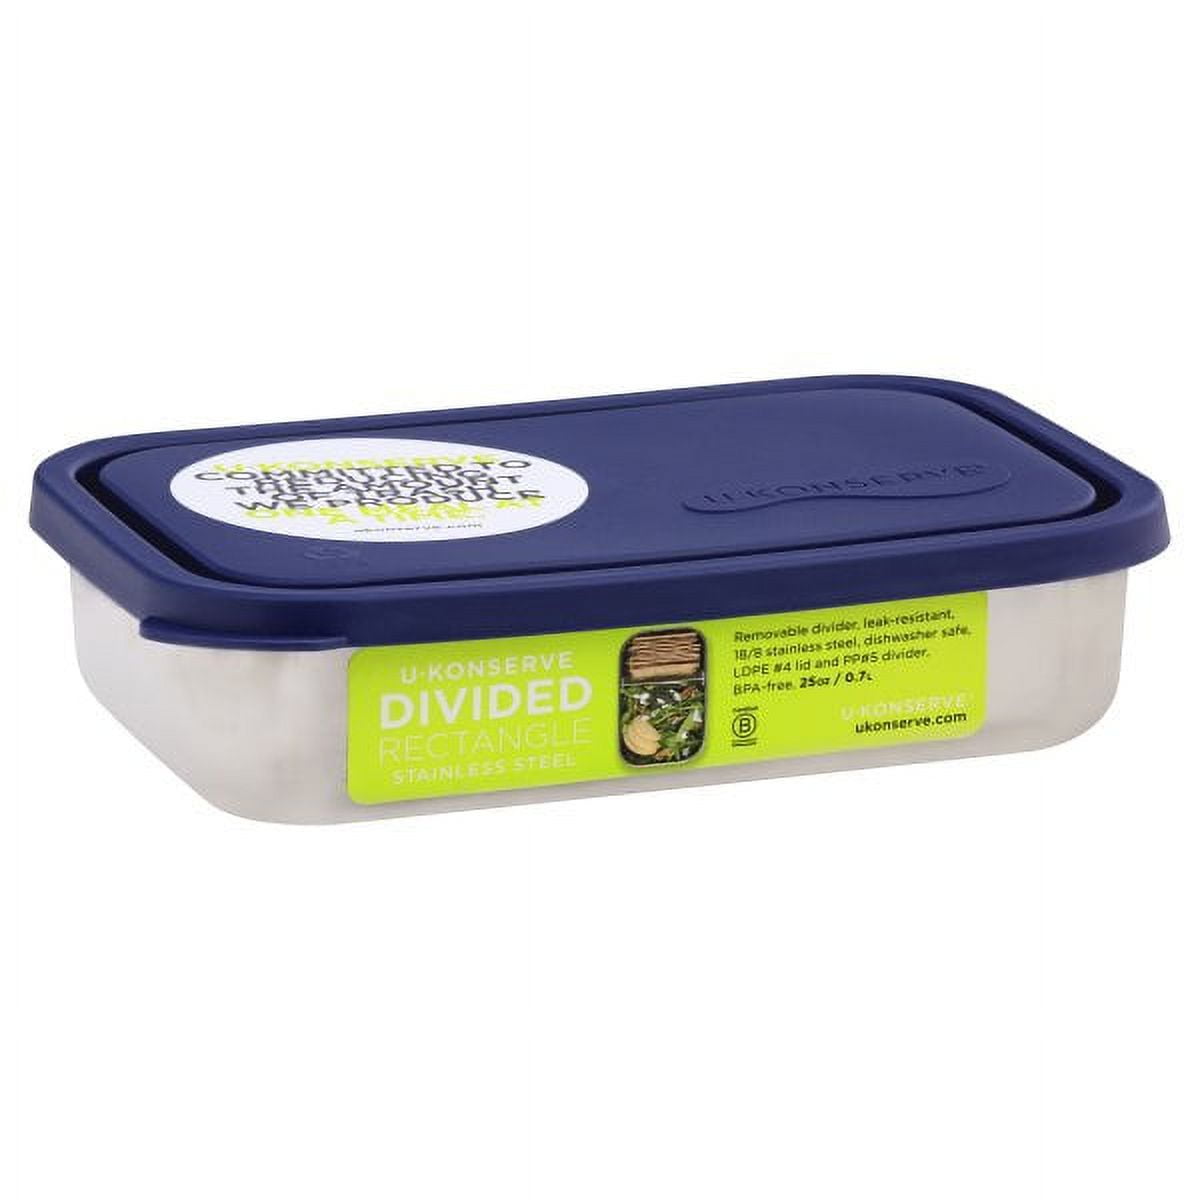 U-Konserve Round Small Stainless Steel Container - 2 Pack - Ocean, 5 oz -  Baker's